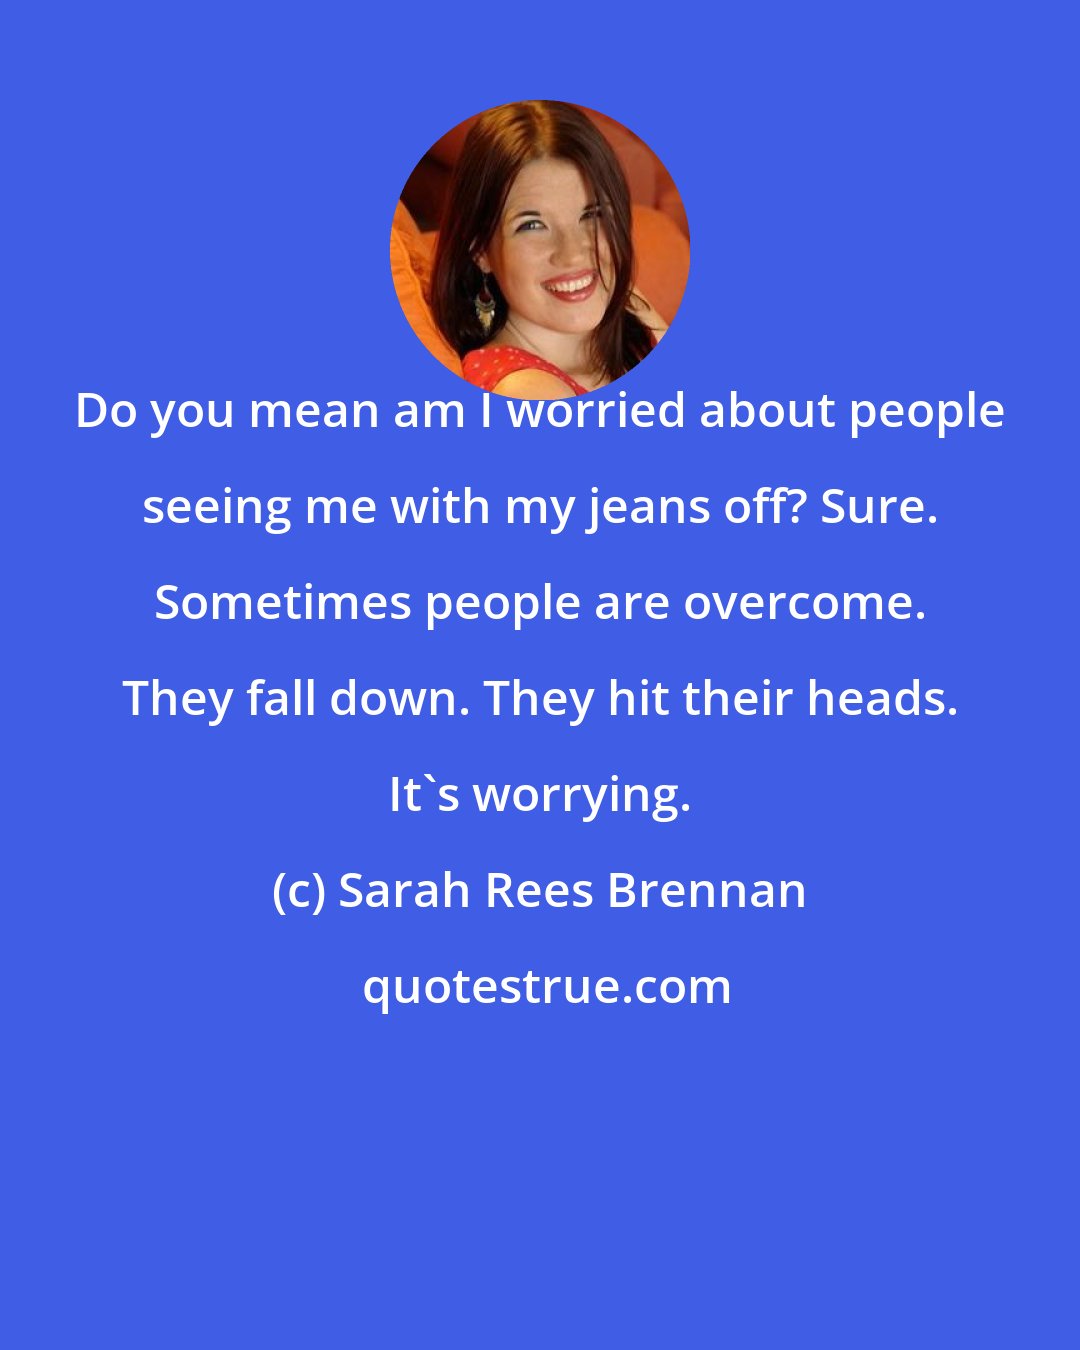 Sarah Rees Brennan: Do you mean am I worried about people seeing me with my jeans off? Sure. Sometimes people are overcome. They fall down. They hit their heads. It's worrying.